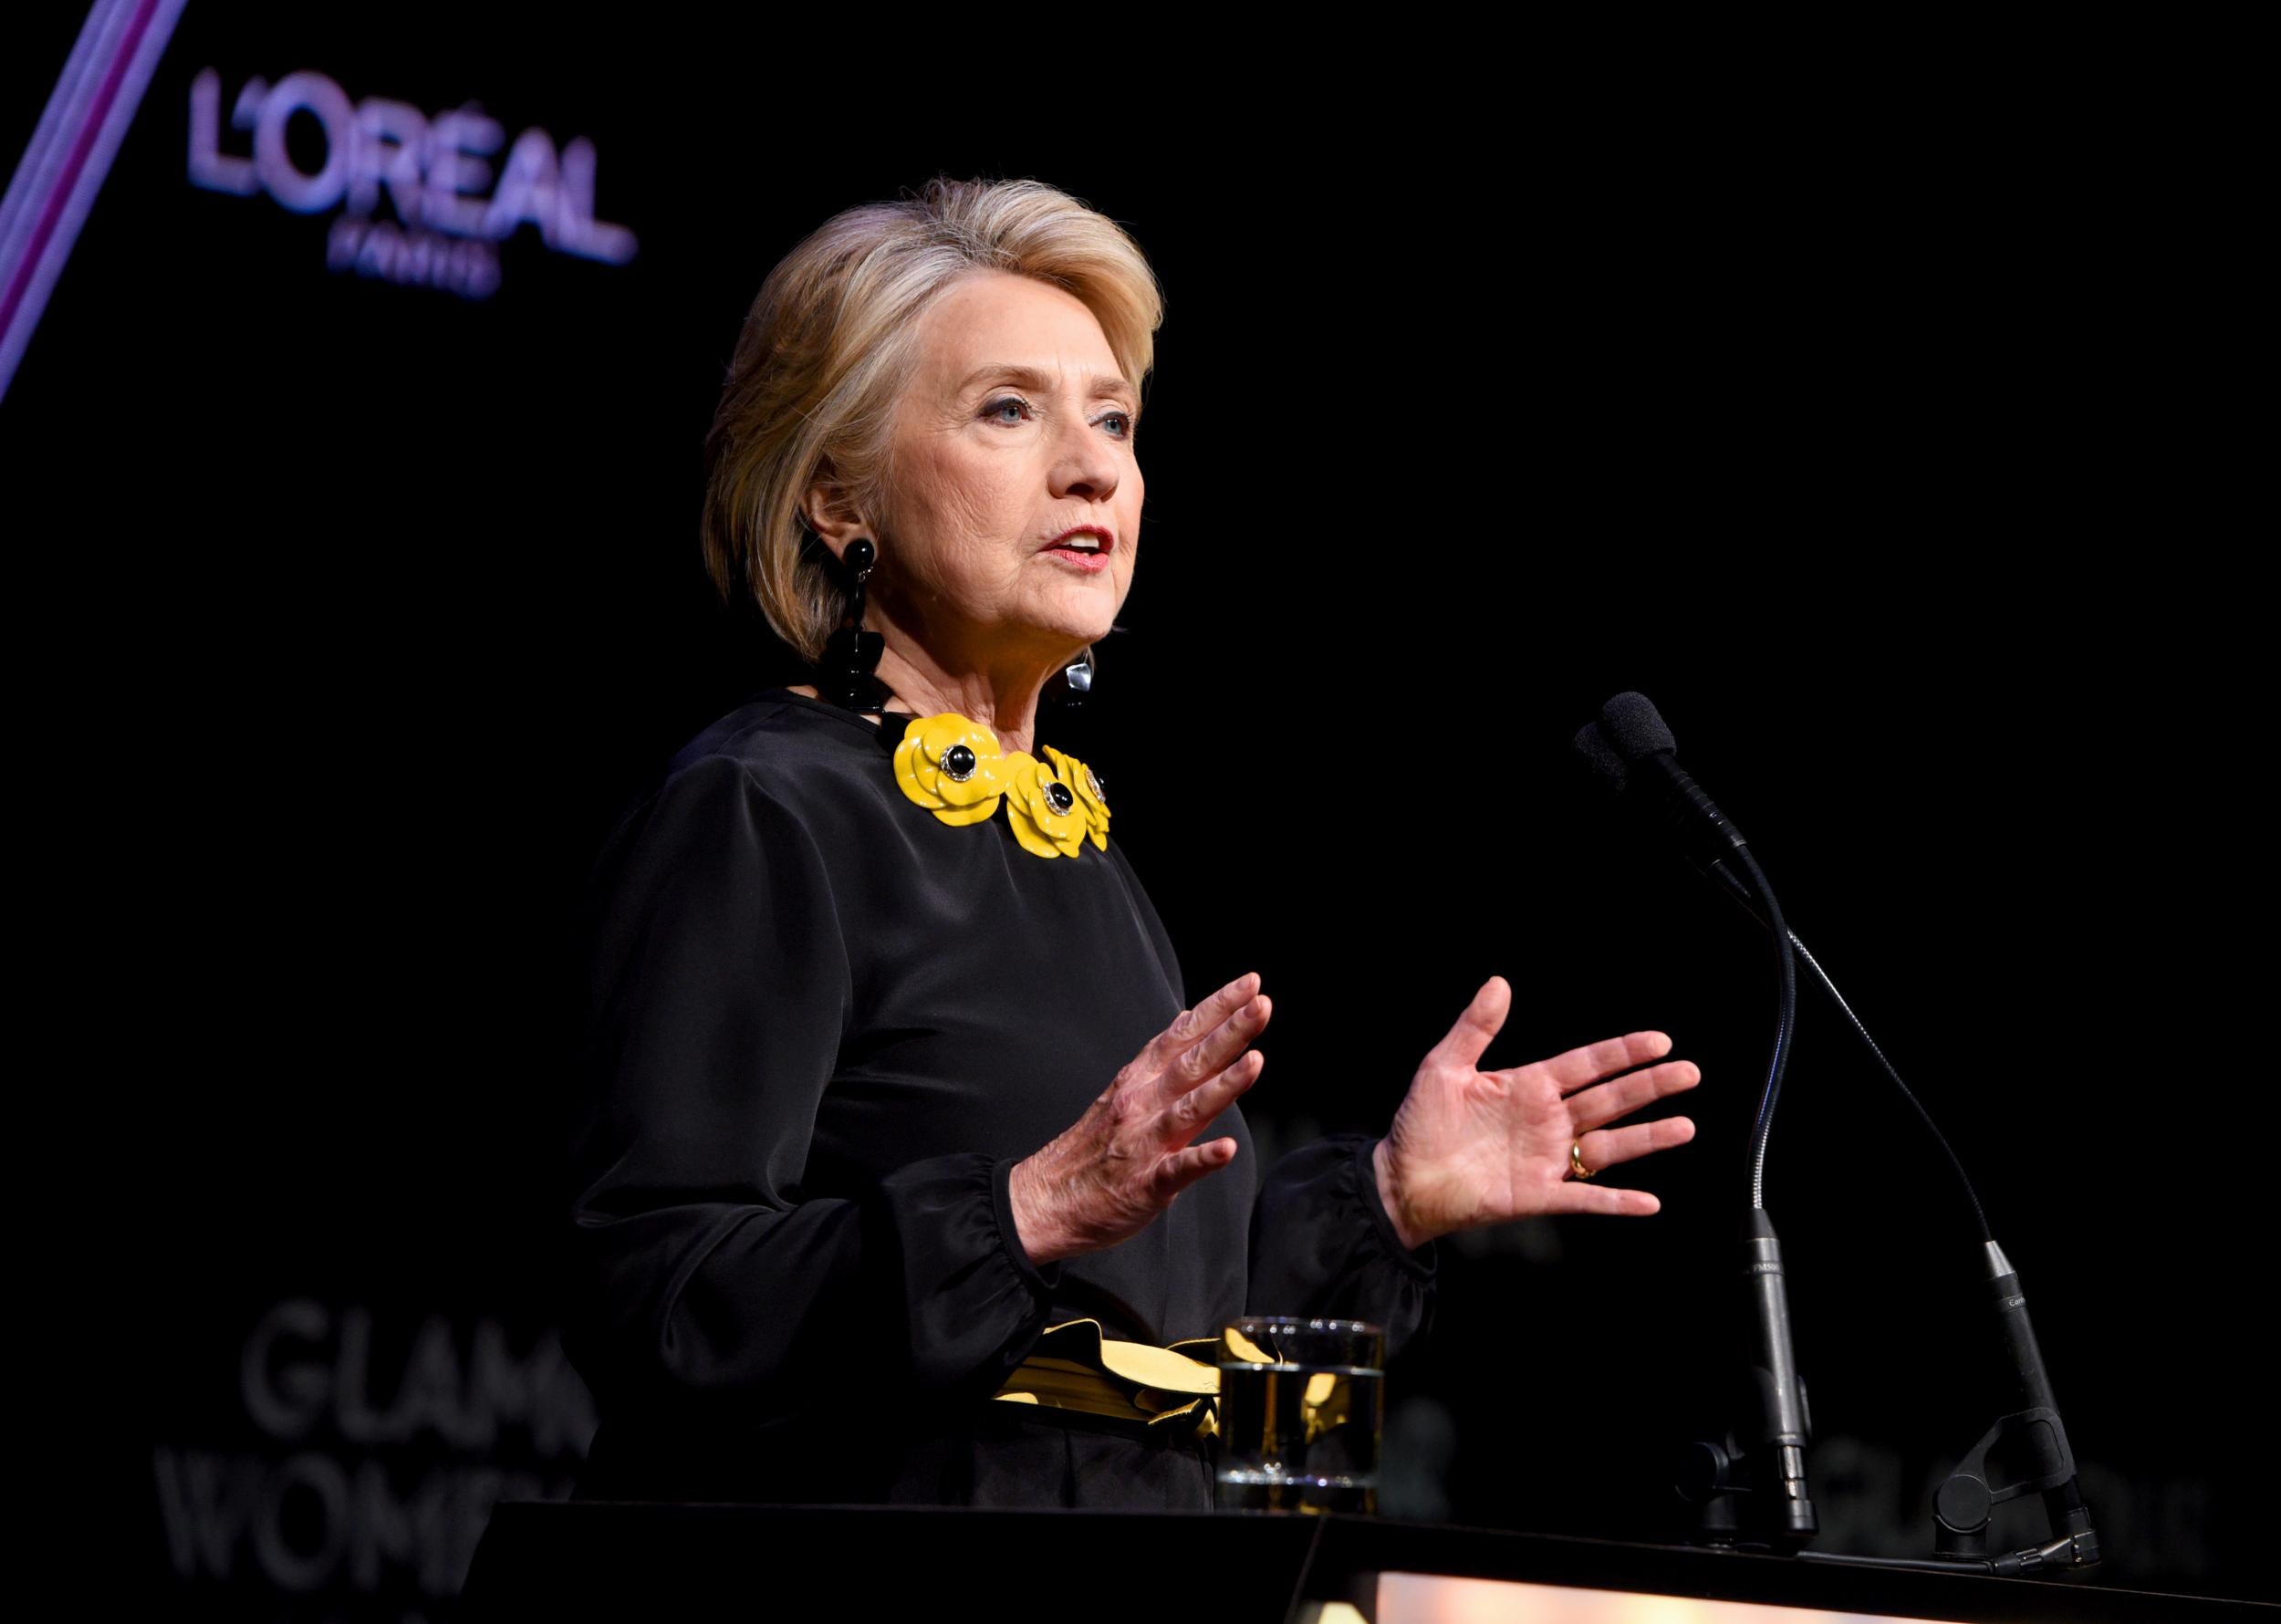 Hillary Clinton delivers her keynote speech at the Bonavero Institue of Human Rights, at Oxford University's Mansfield College